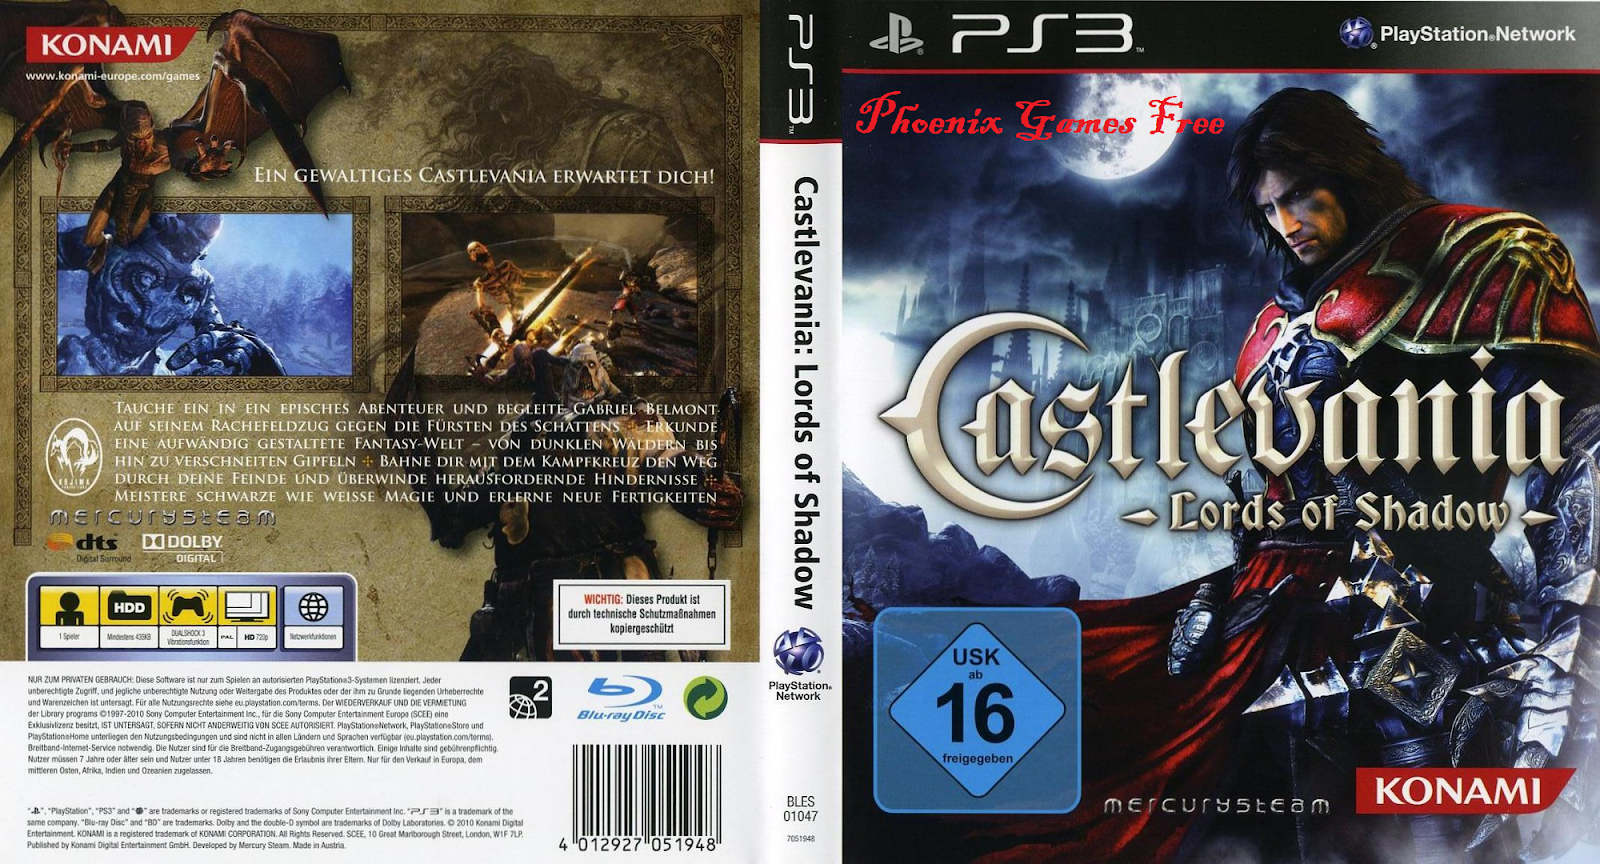 Castlevania Lords of Shadow ps3. Bles00001 ps3. Игра на PS Shadow. Шадов сони. Bles ps3